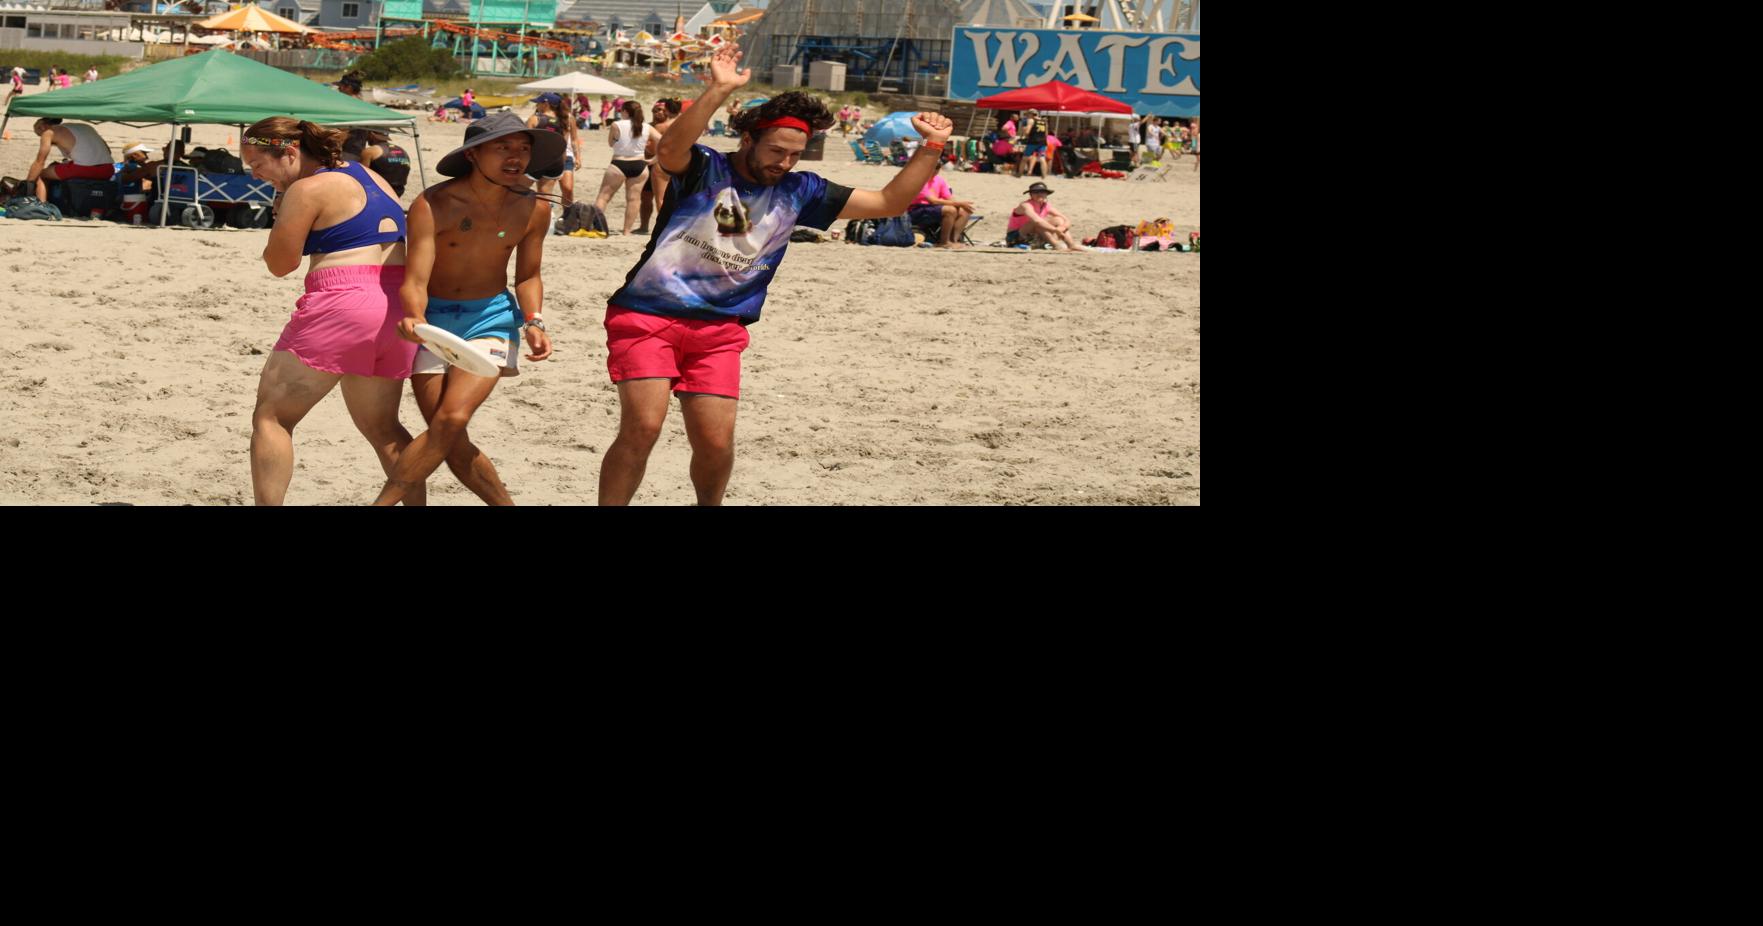 Thousands gather on Wildwood beaches for Ultimate Frisbee tournament